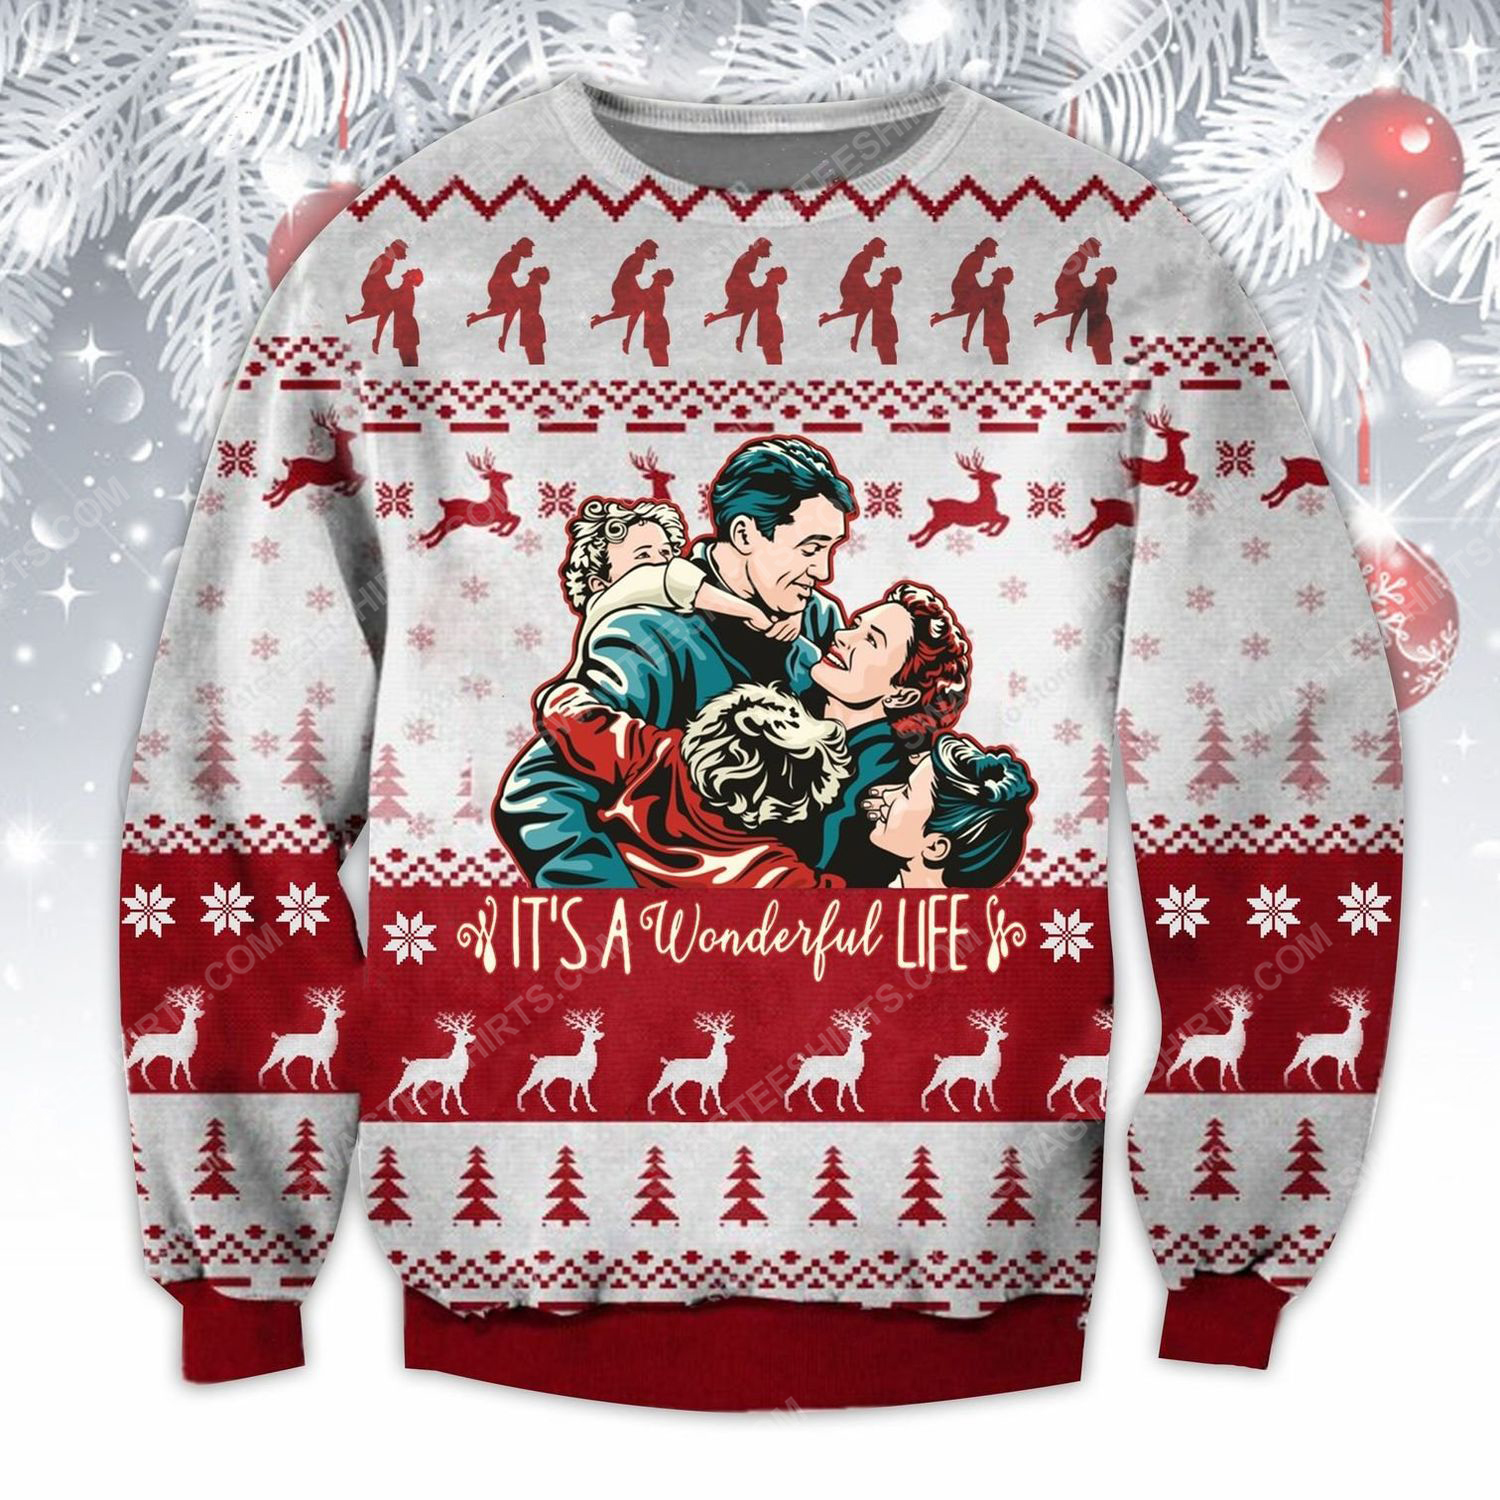 It's a wonderful life ugly christmas sweater - Copy (2)